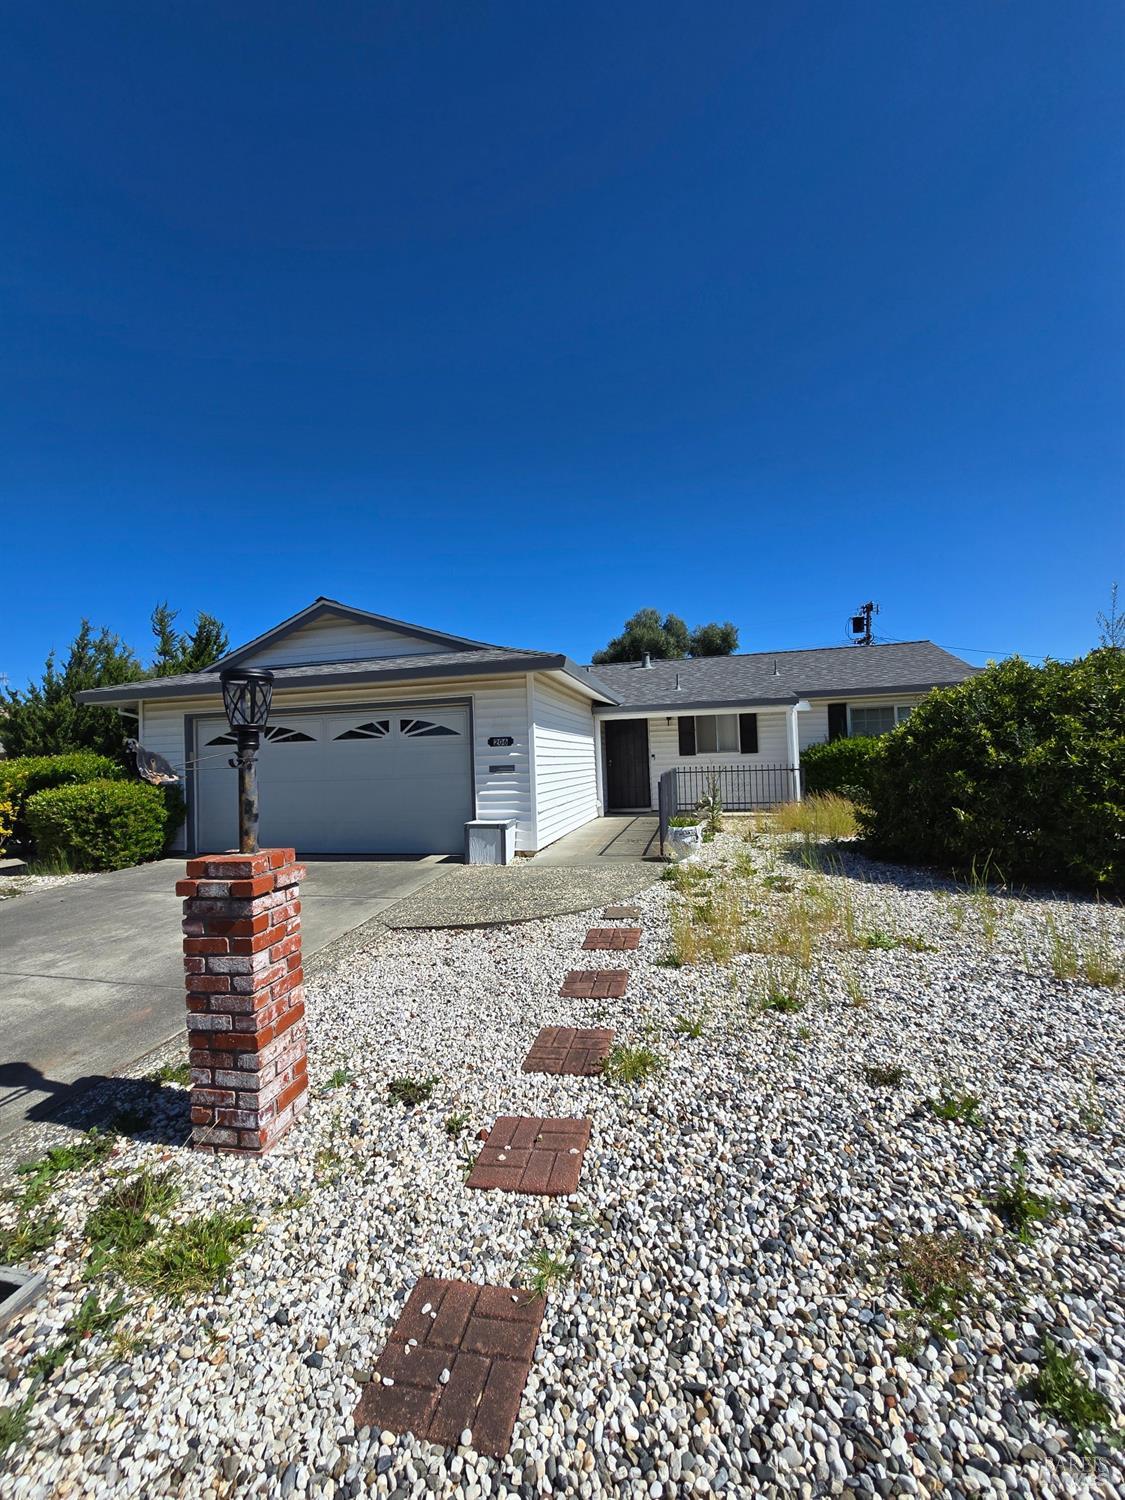 Photo of 206 Olympic Cir in Vacaville, CA